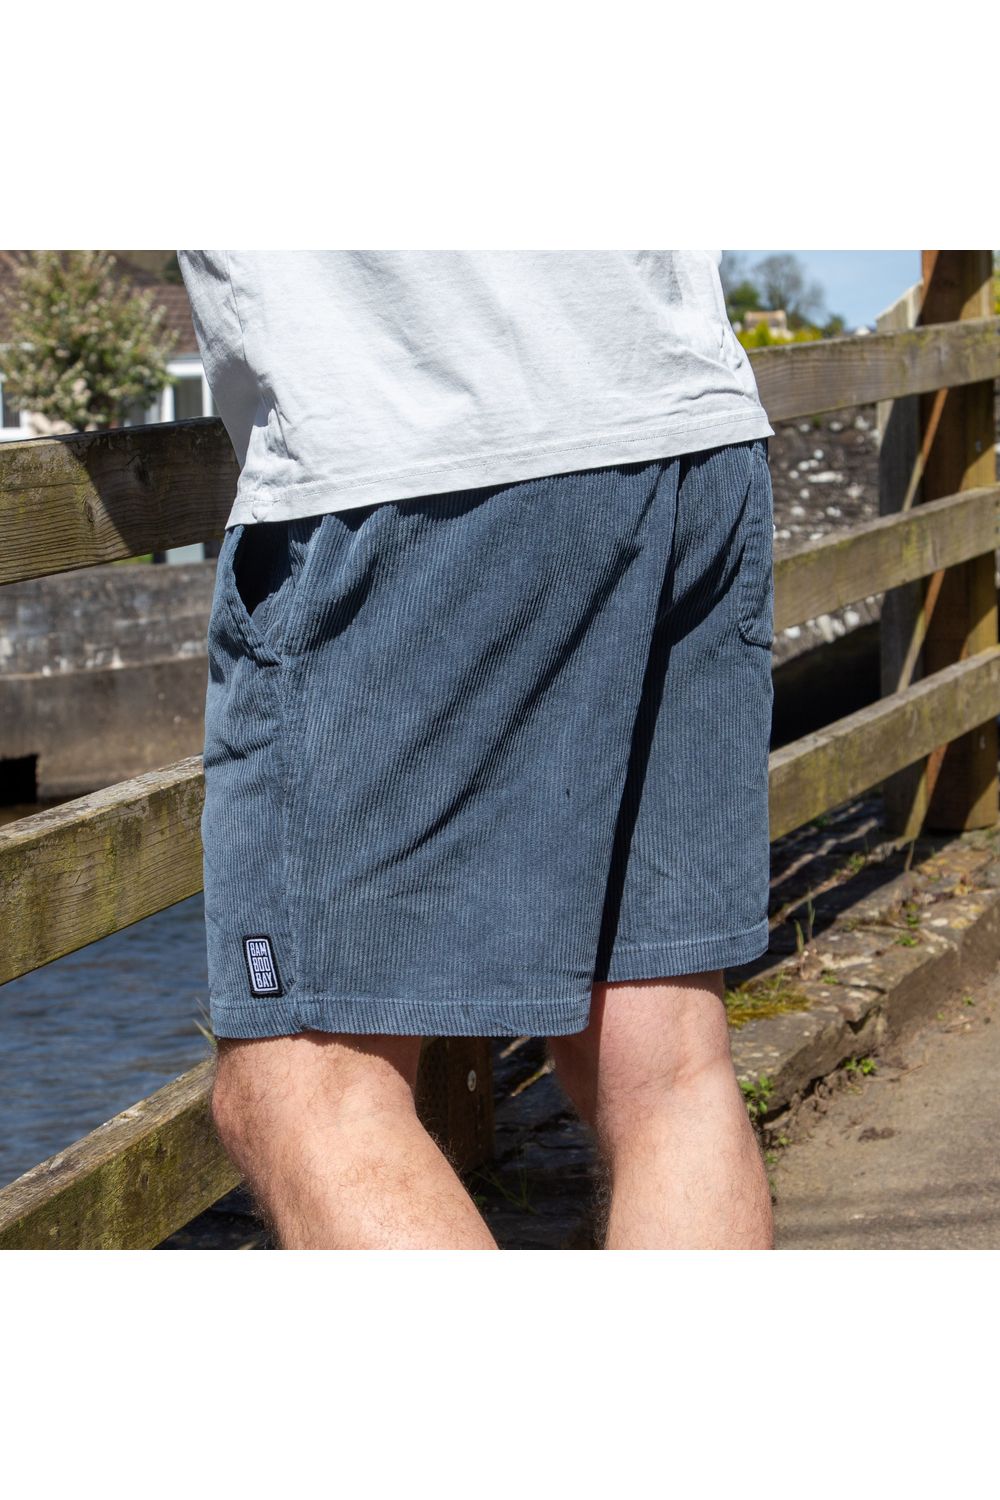 Bamboobay navy cord shorts side view on a model